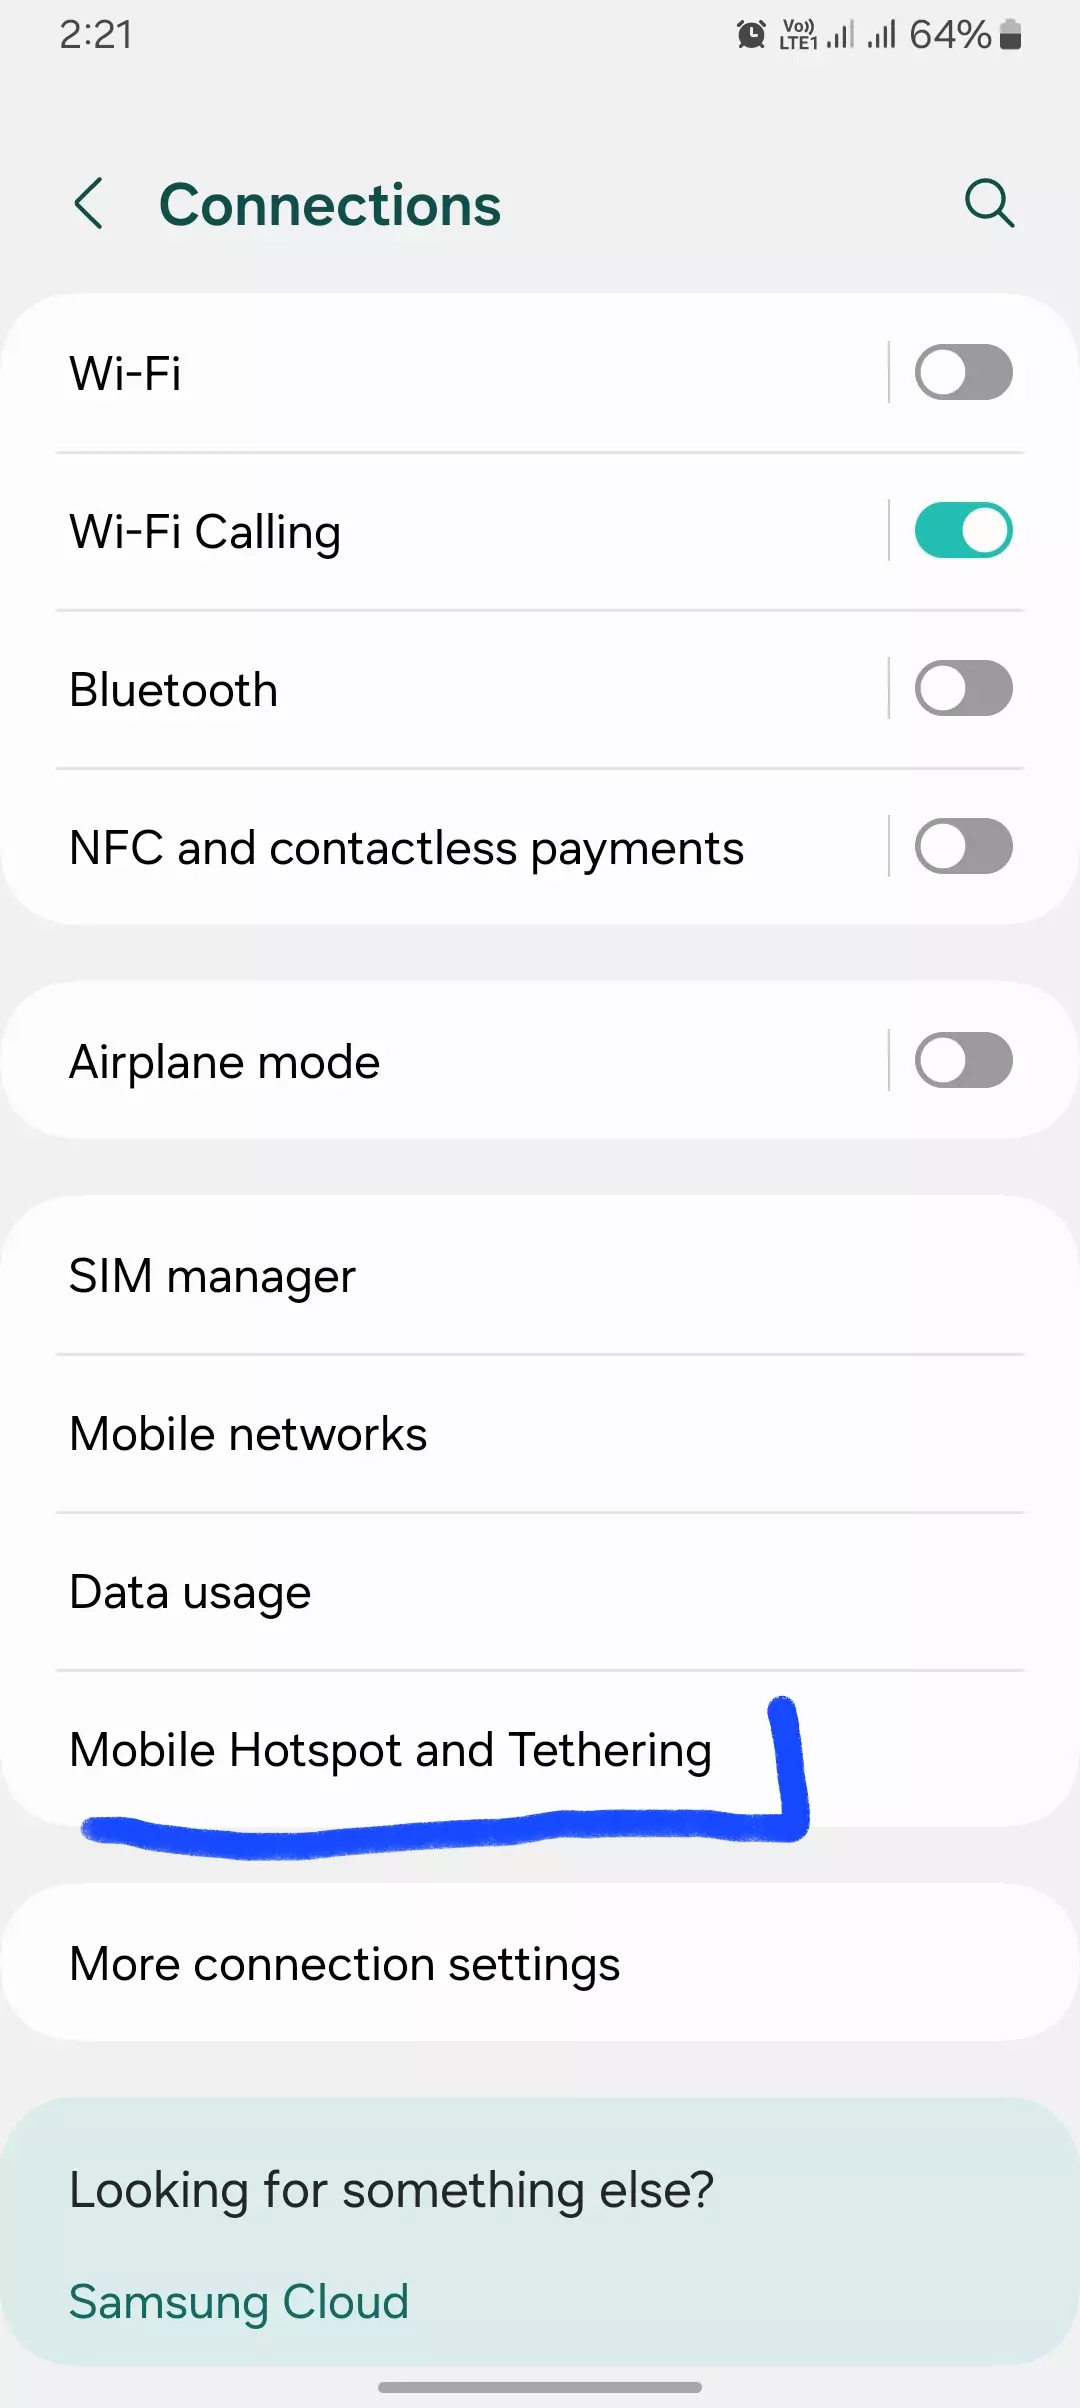 screenshot of mobile hotspot and tethering option highlighted